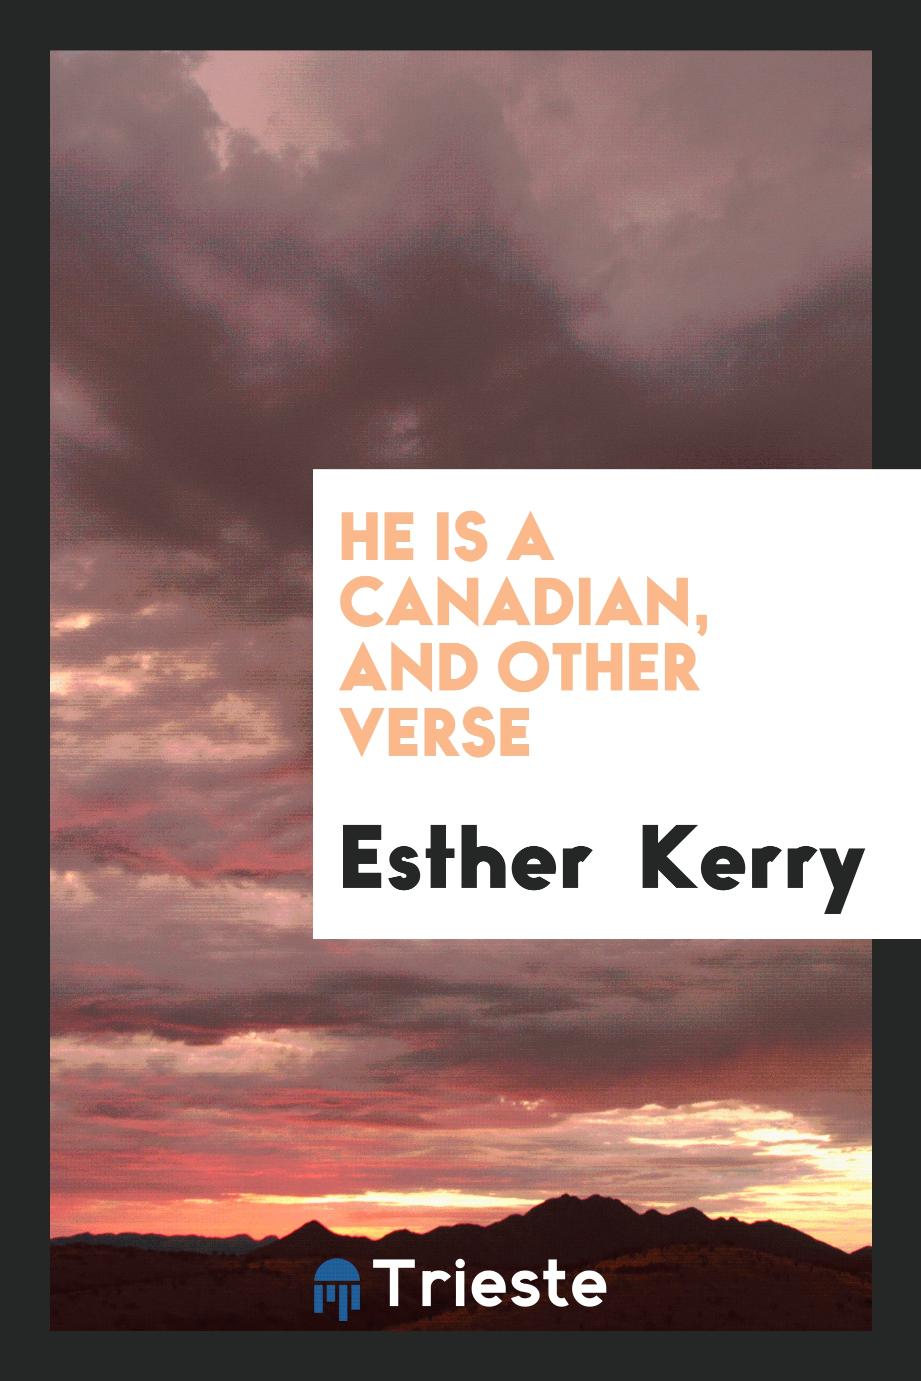 He is a Canadian, and Other Verse